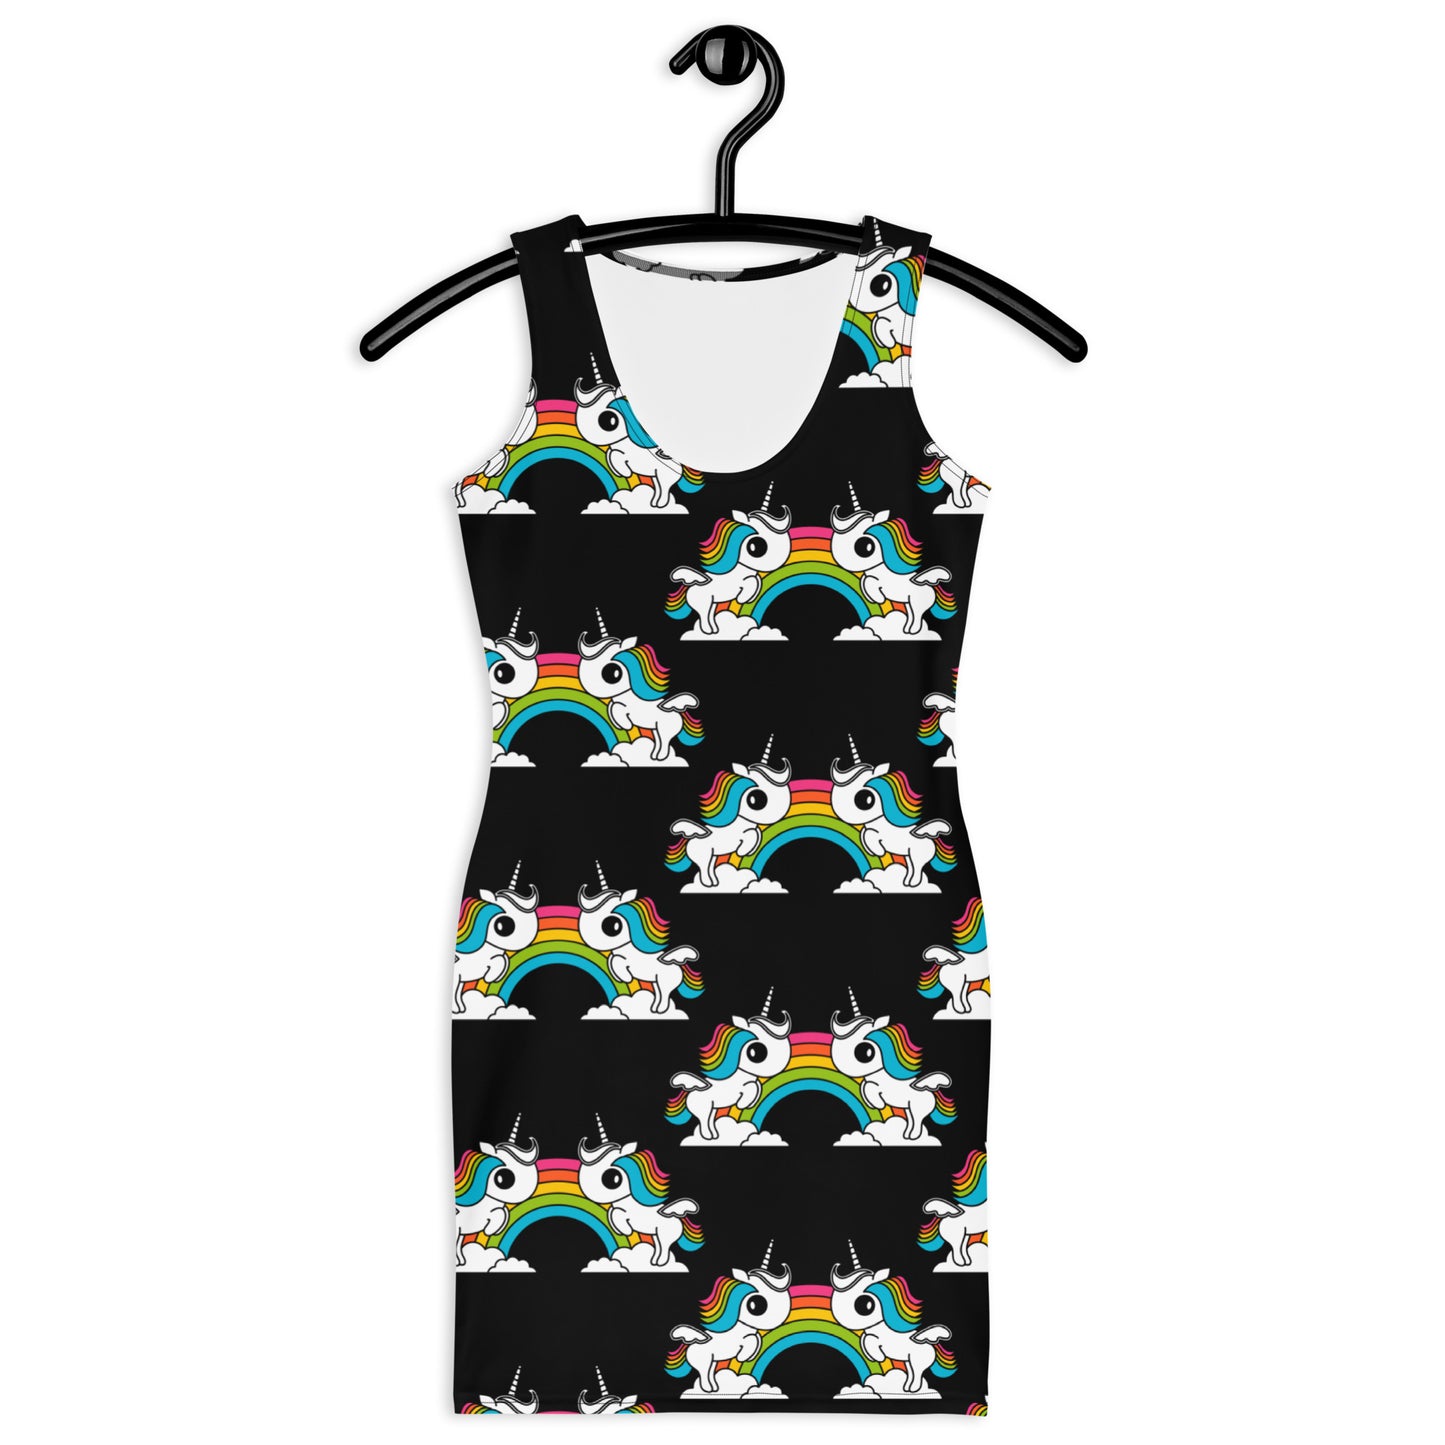 UNIQUE black - Fitted Dress with unicorns and rainbows